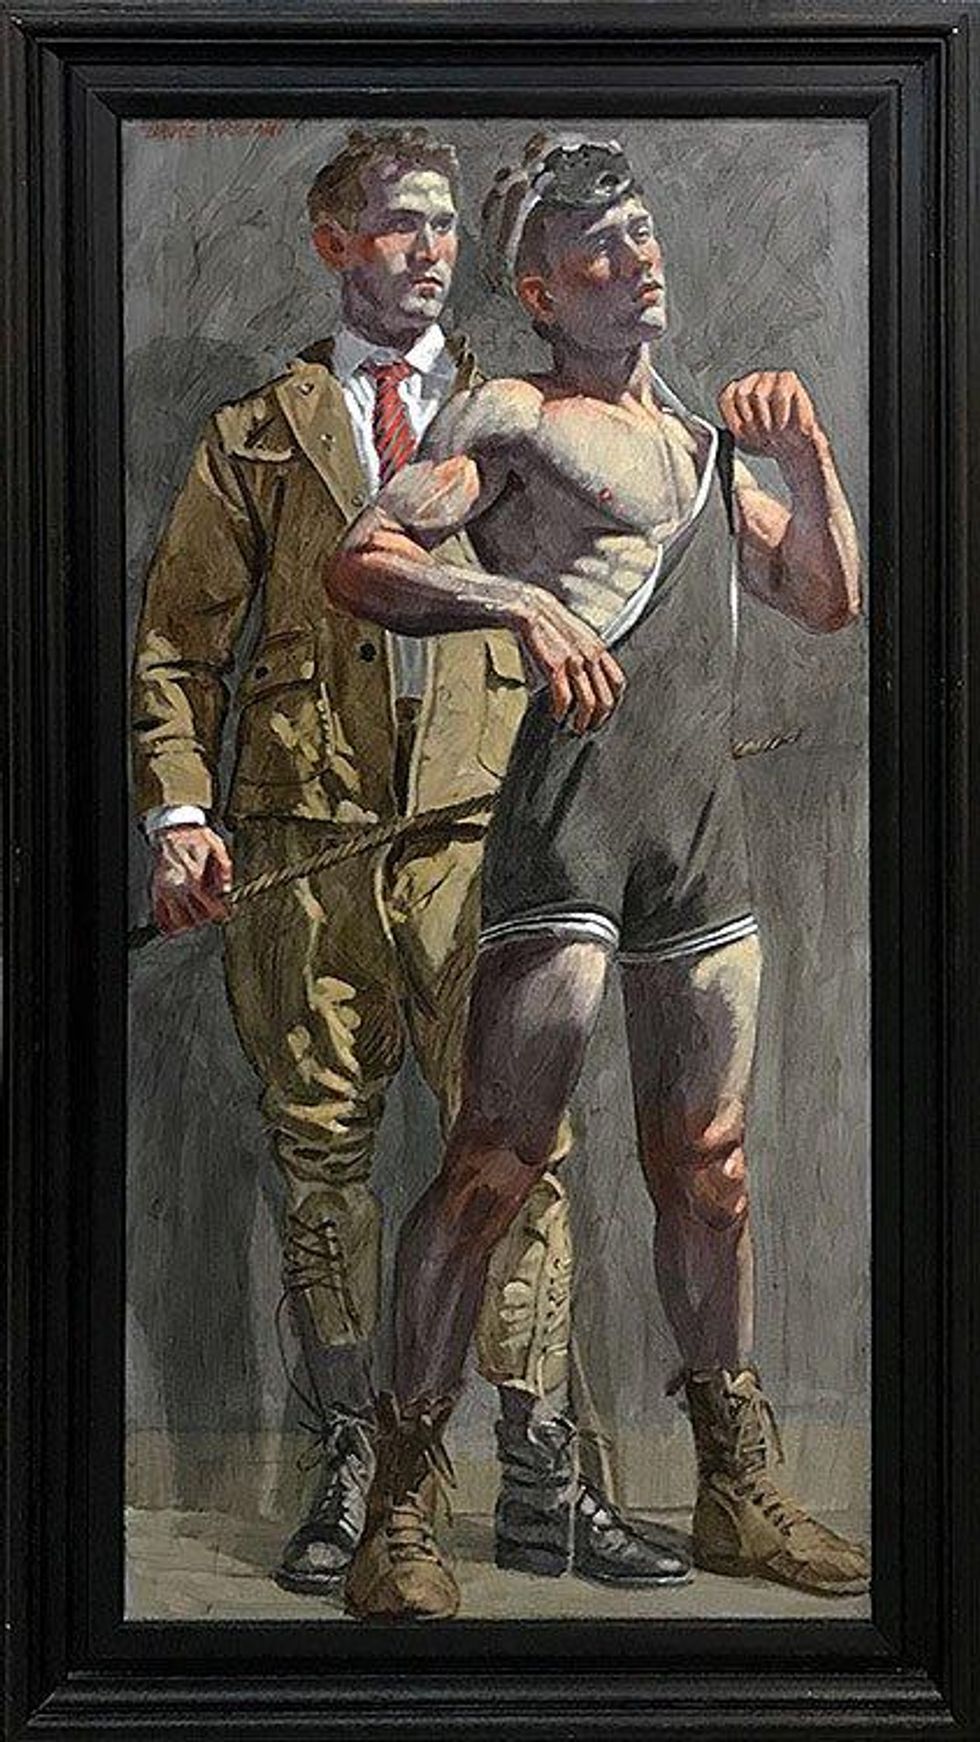 \u00a9 Mark Beard [Bruce Sargeant (1989-1938)], \u201cWrestler and Man Looking On,\u201d n.d., Oil on canvas, 48 x 24 inches, Courtesy of ClampArt, New York City